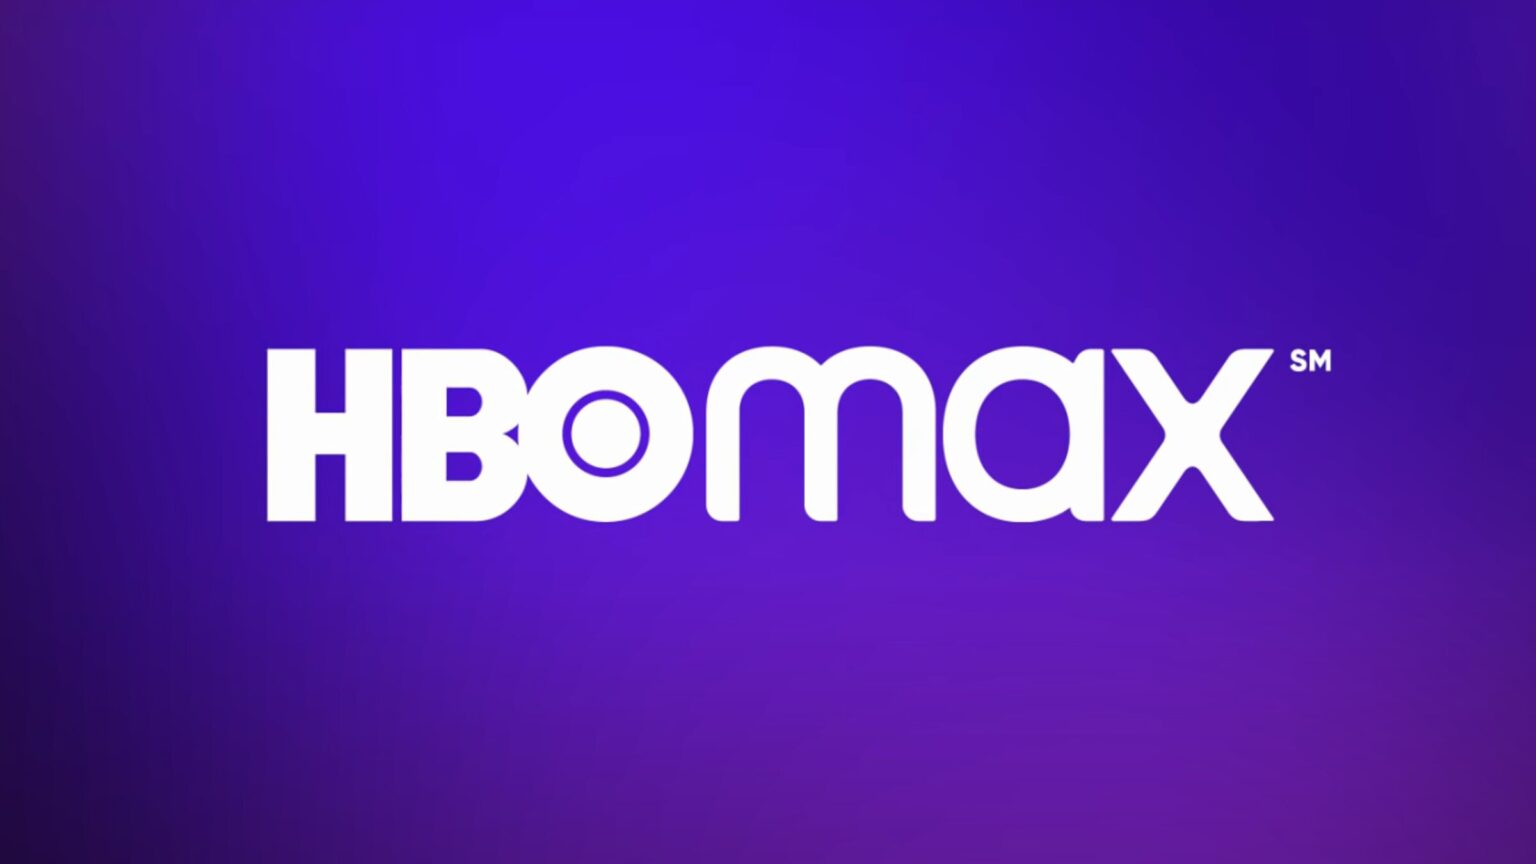 Considering all the great shows on HBO Max, the new saying should instead be "HBO Max and chill". Find out what your next binge watch should be here.